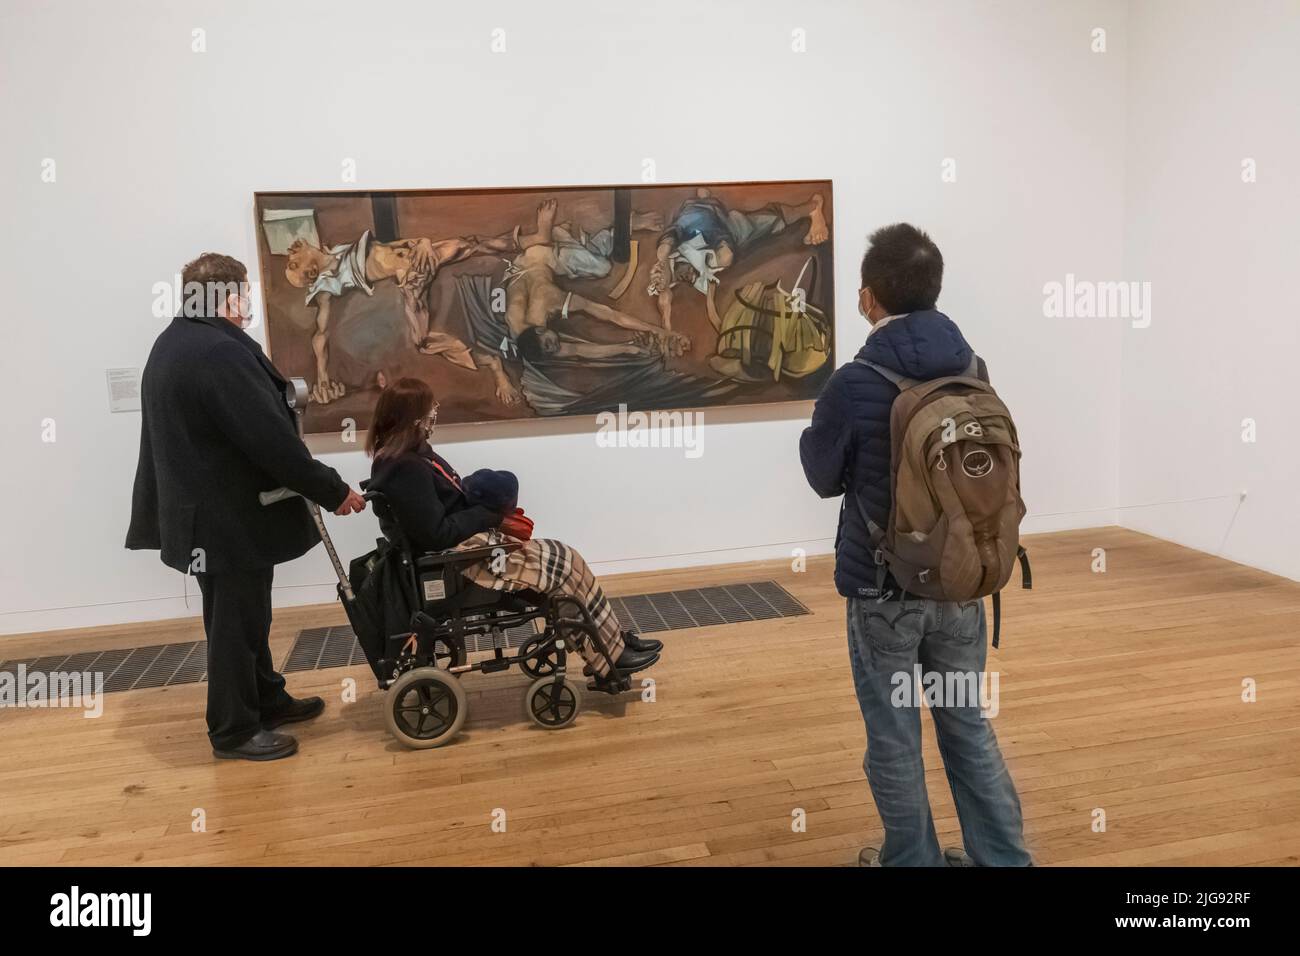 England, London, Southwark, Bankside, Tate Modern Art Gallery, Disabled Visitor in Wheelchair and Artwork Stock Photo